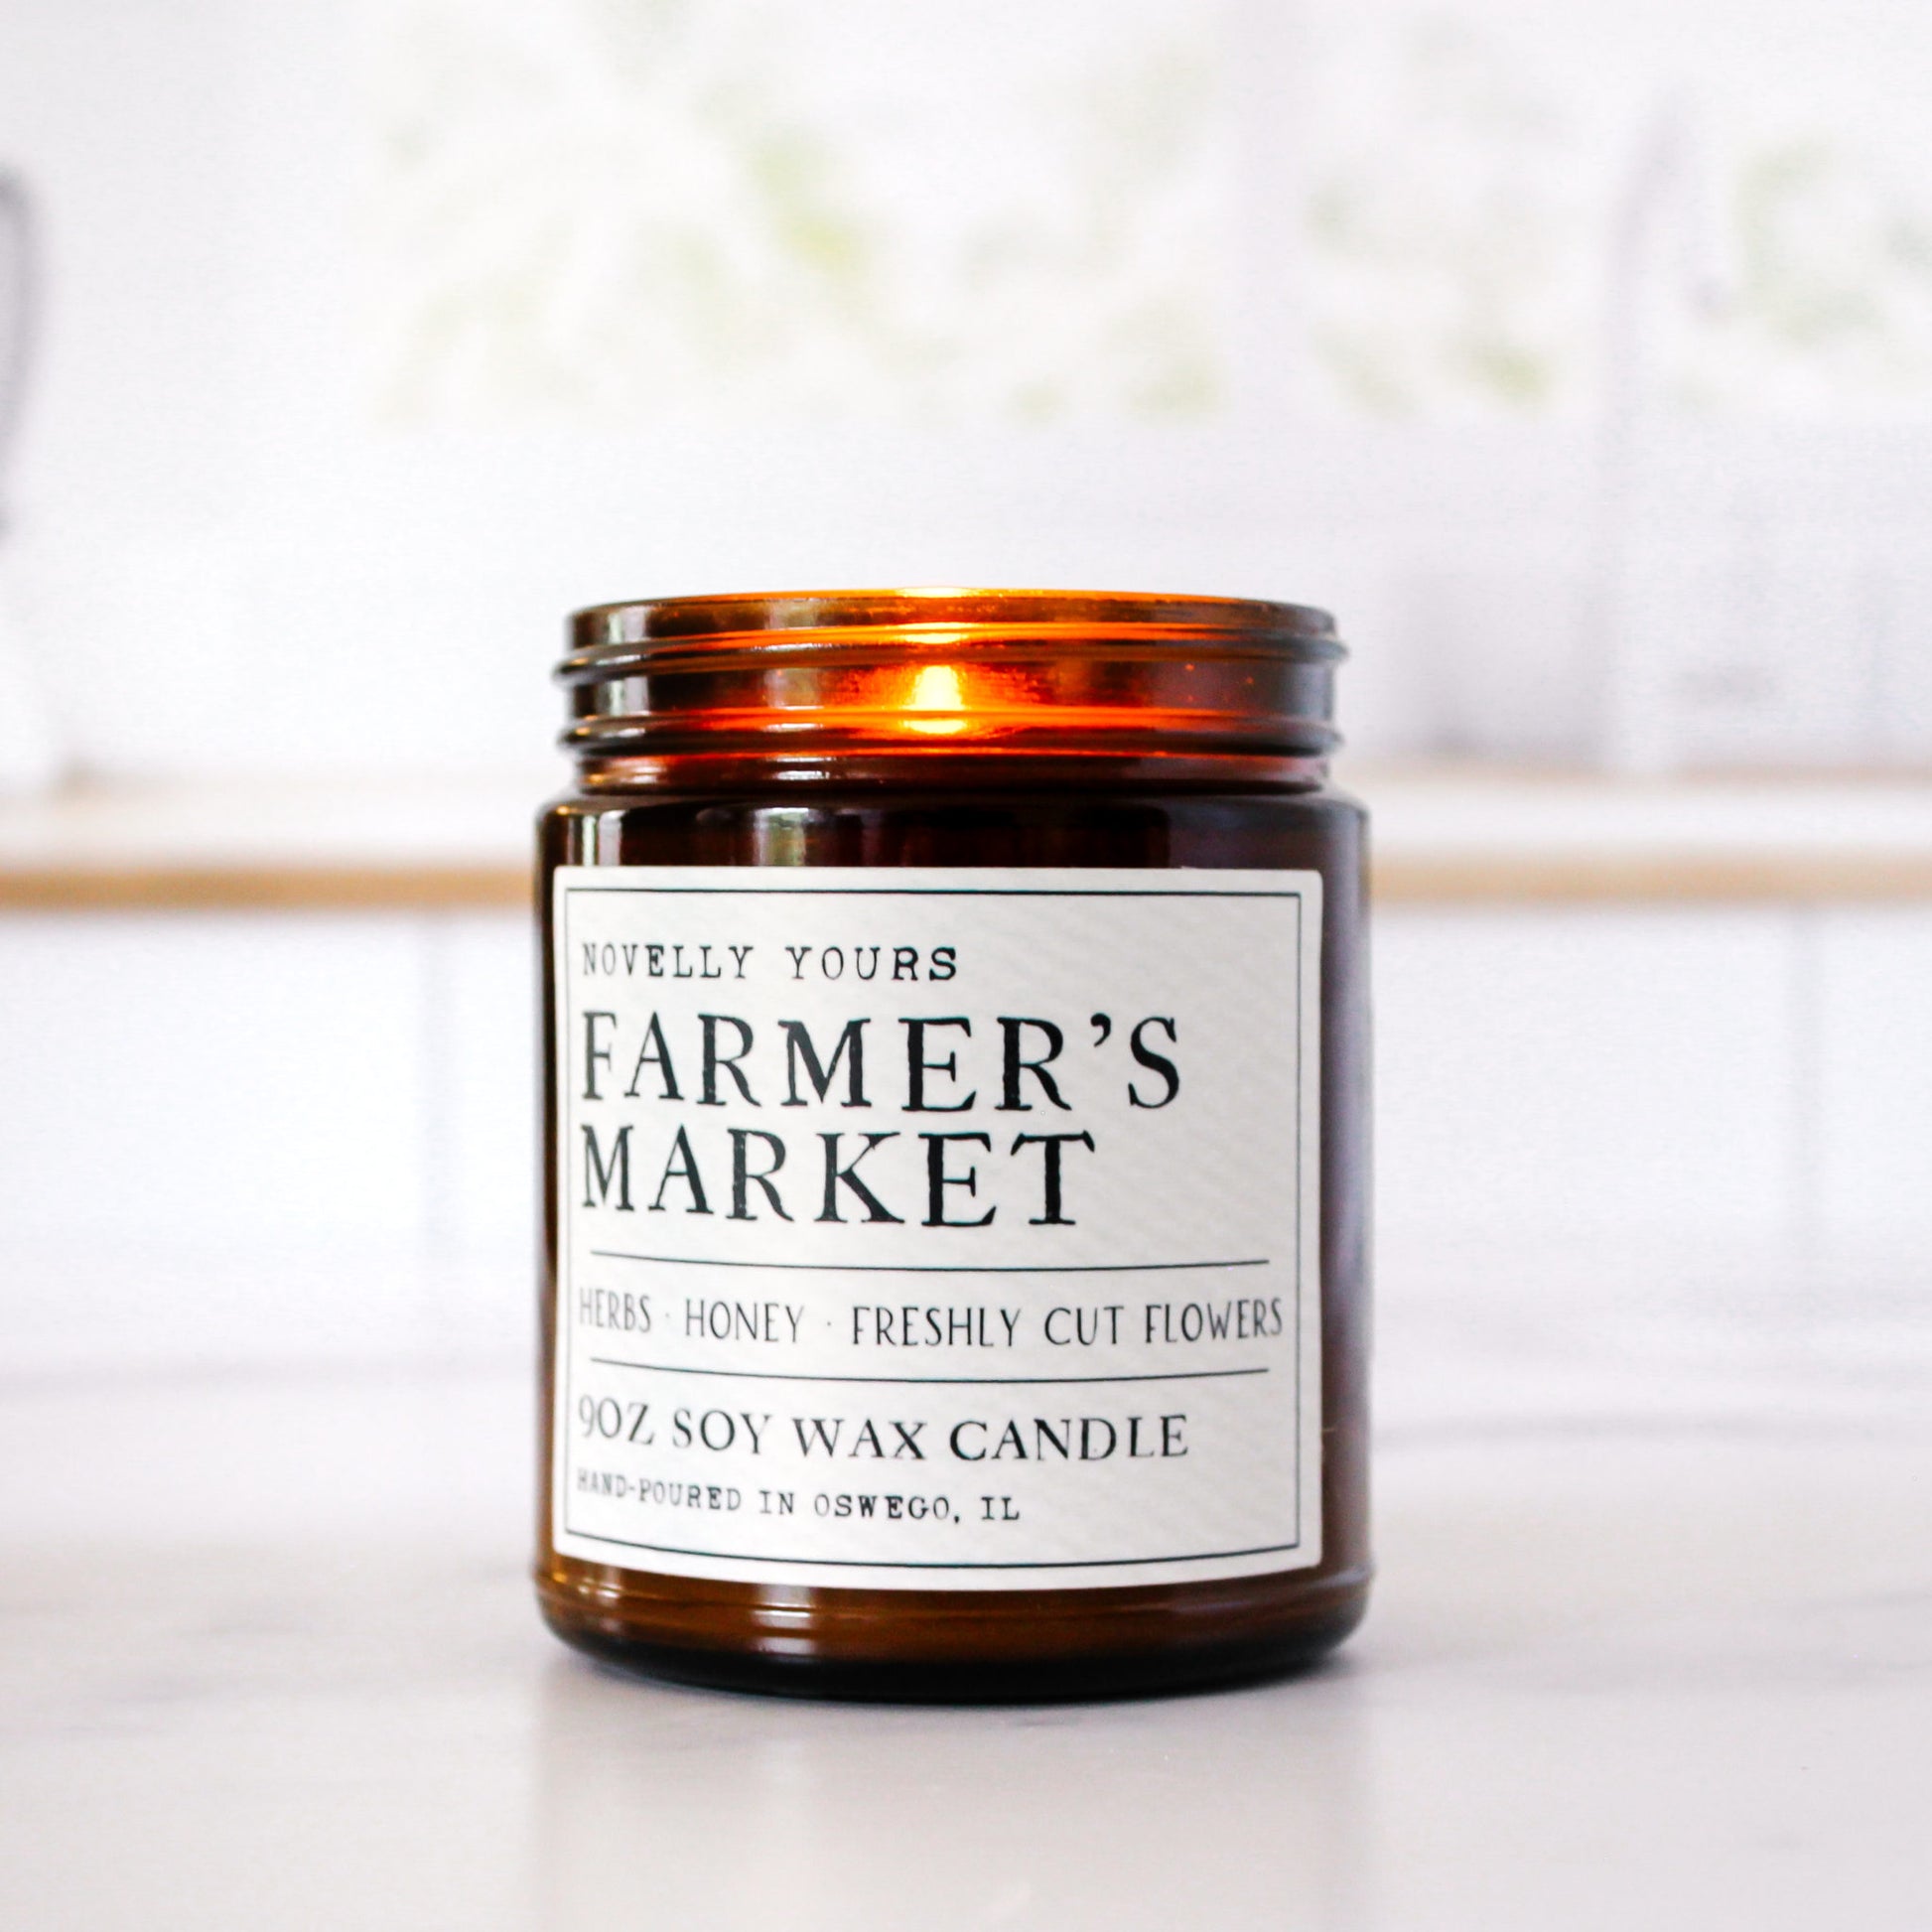 soy wax candle in amber jar called "Farmer's market" with rustic label aesthetic